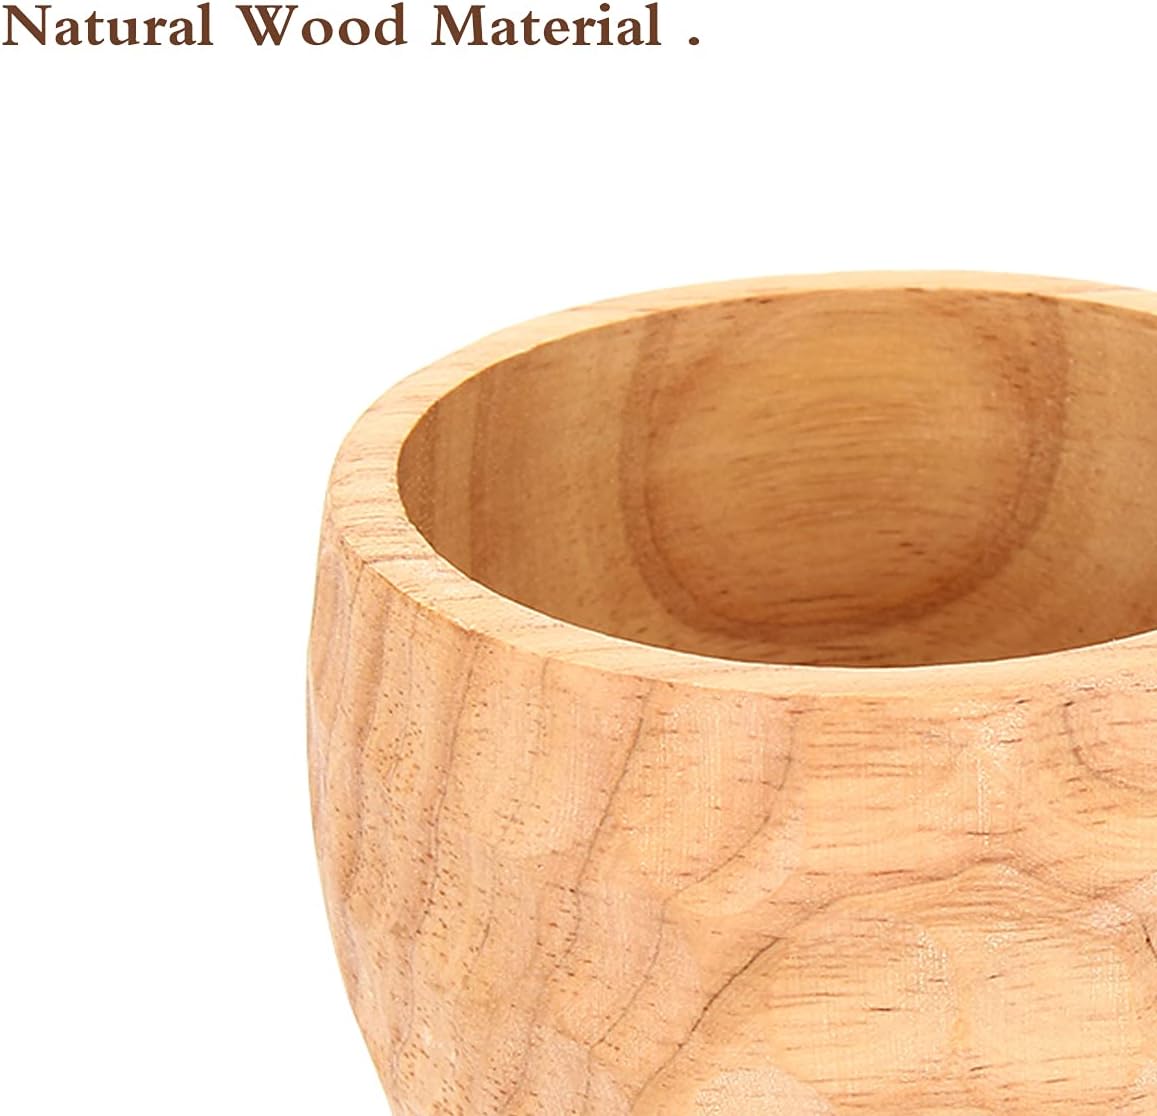 Nordic Style Handmade Wooden Cups Finnish Traditional 230 ml